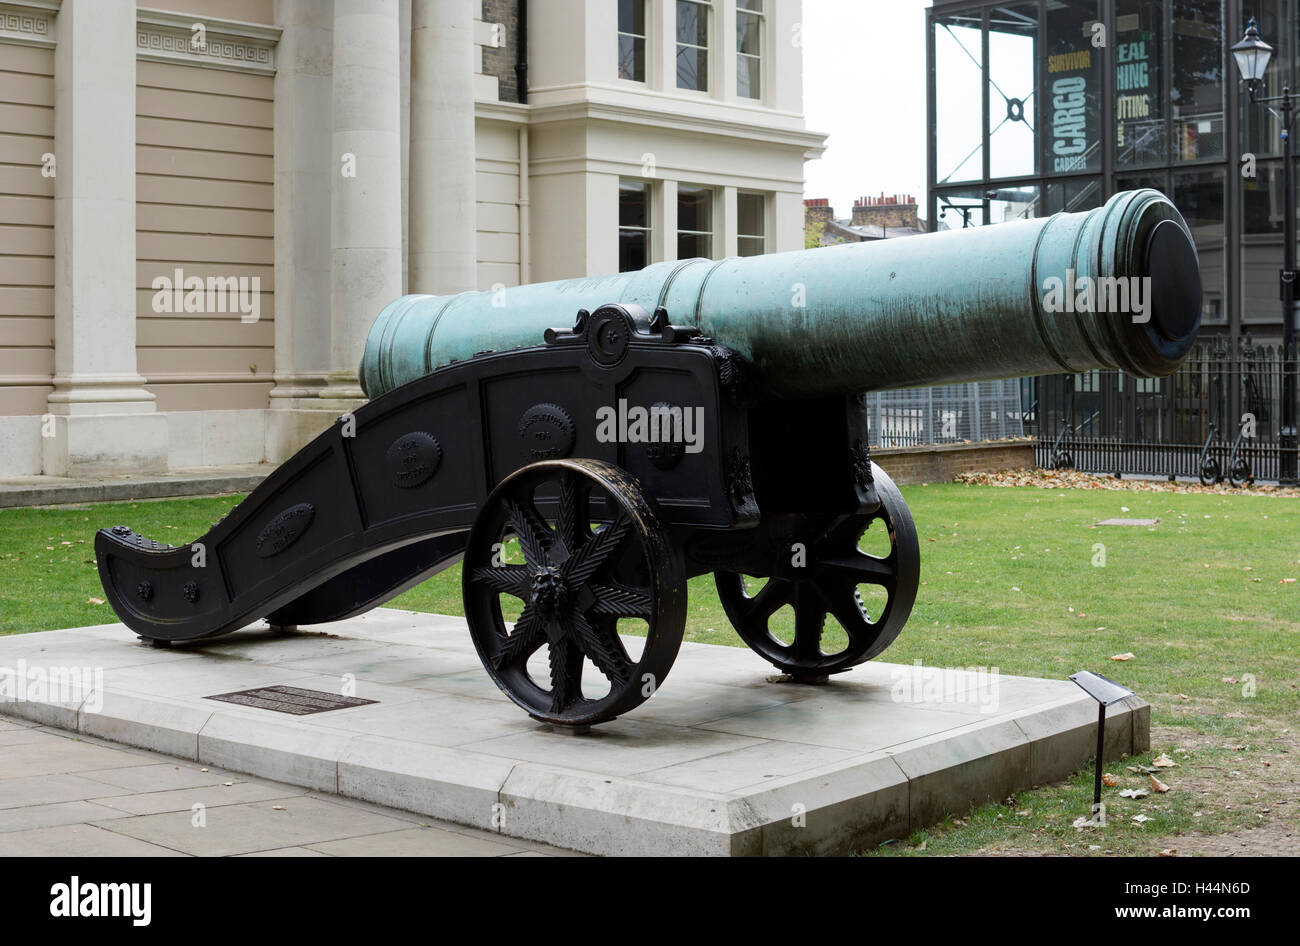 18th century Turkish naval cannon, Old Royal Naval College, Greenwich, London, UK Stock Photo